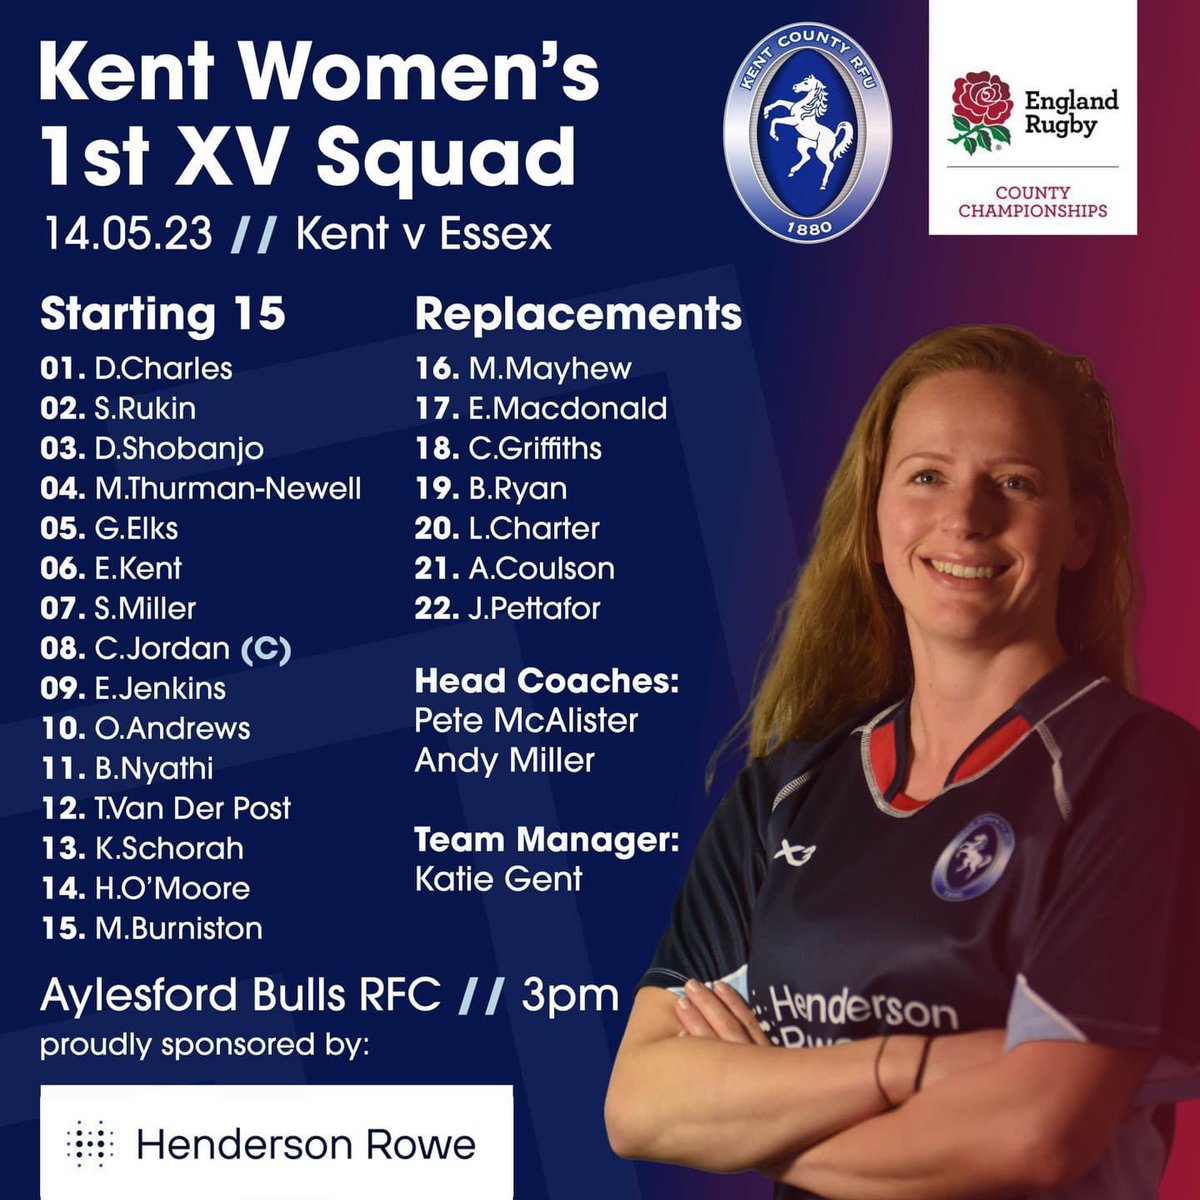 All support welcome as Tara and the Kent Women’s Team take on Essex at Aylesford Bulls RFC this Sunday 🏉🏉🏉 Sunday 14th May 🏉 Kent vs Essex Aylesford Bulls- 3PM Sunday 21st May 🏉 Kent vs Hampshire Medway RFC - 3PM @KentRugby #gravesendgremlins #kentrugby #womensrugbykent